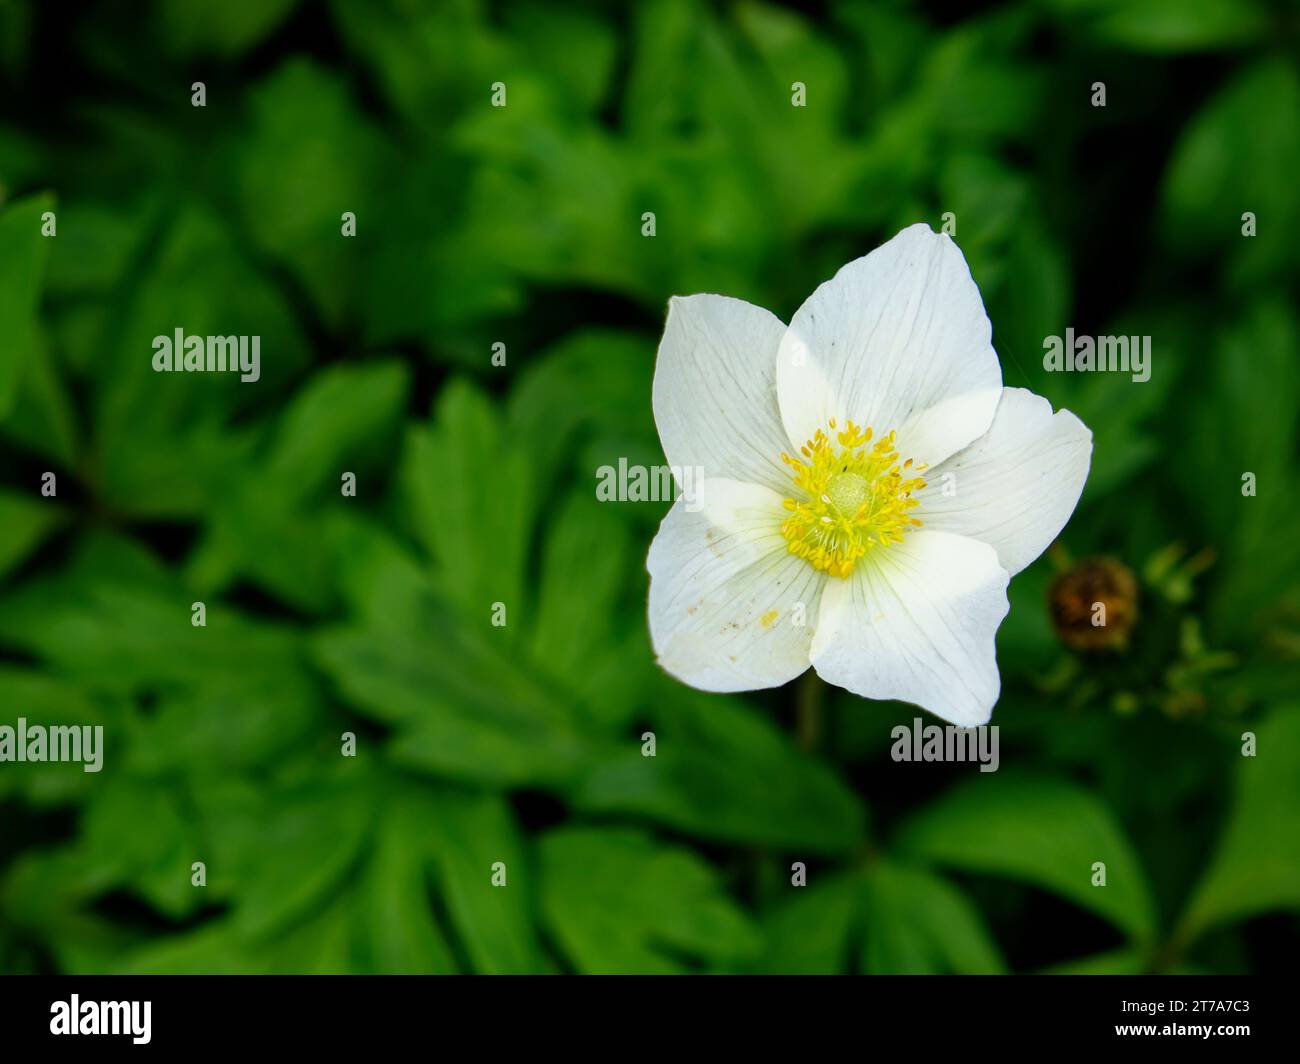 A white flower with a yellow center is in focus in the foreground of a green leafy background. Beautiful white anemone flower shot with blur backgroun Stock Photo